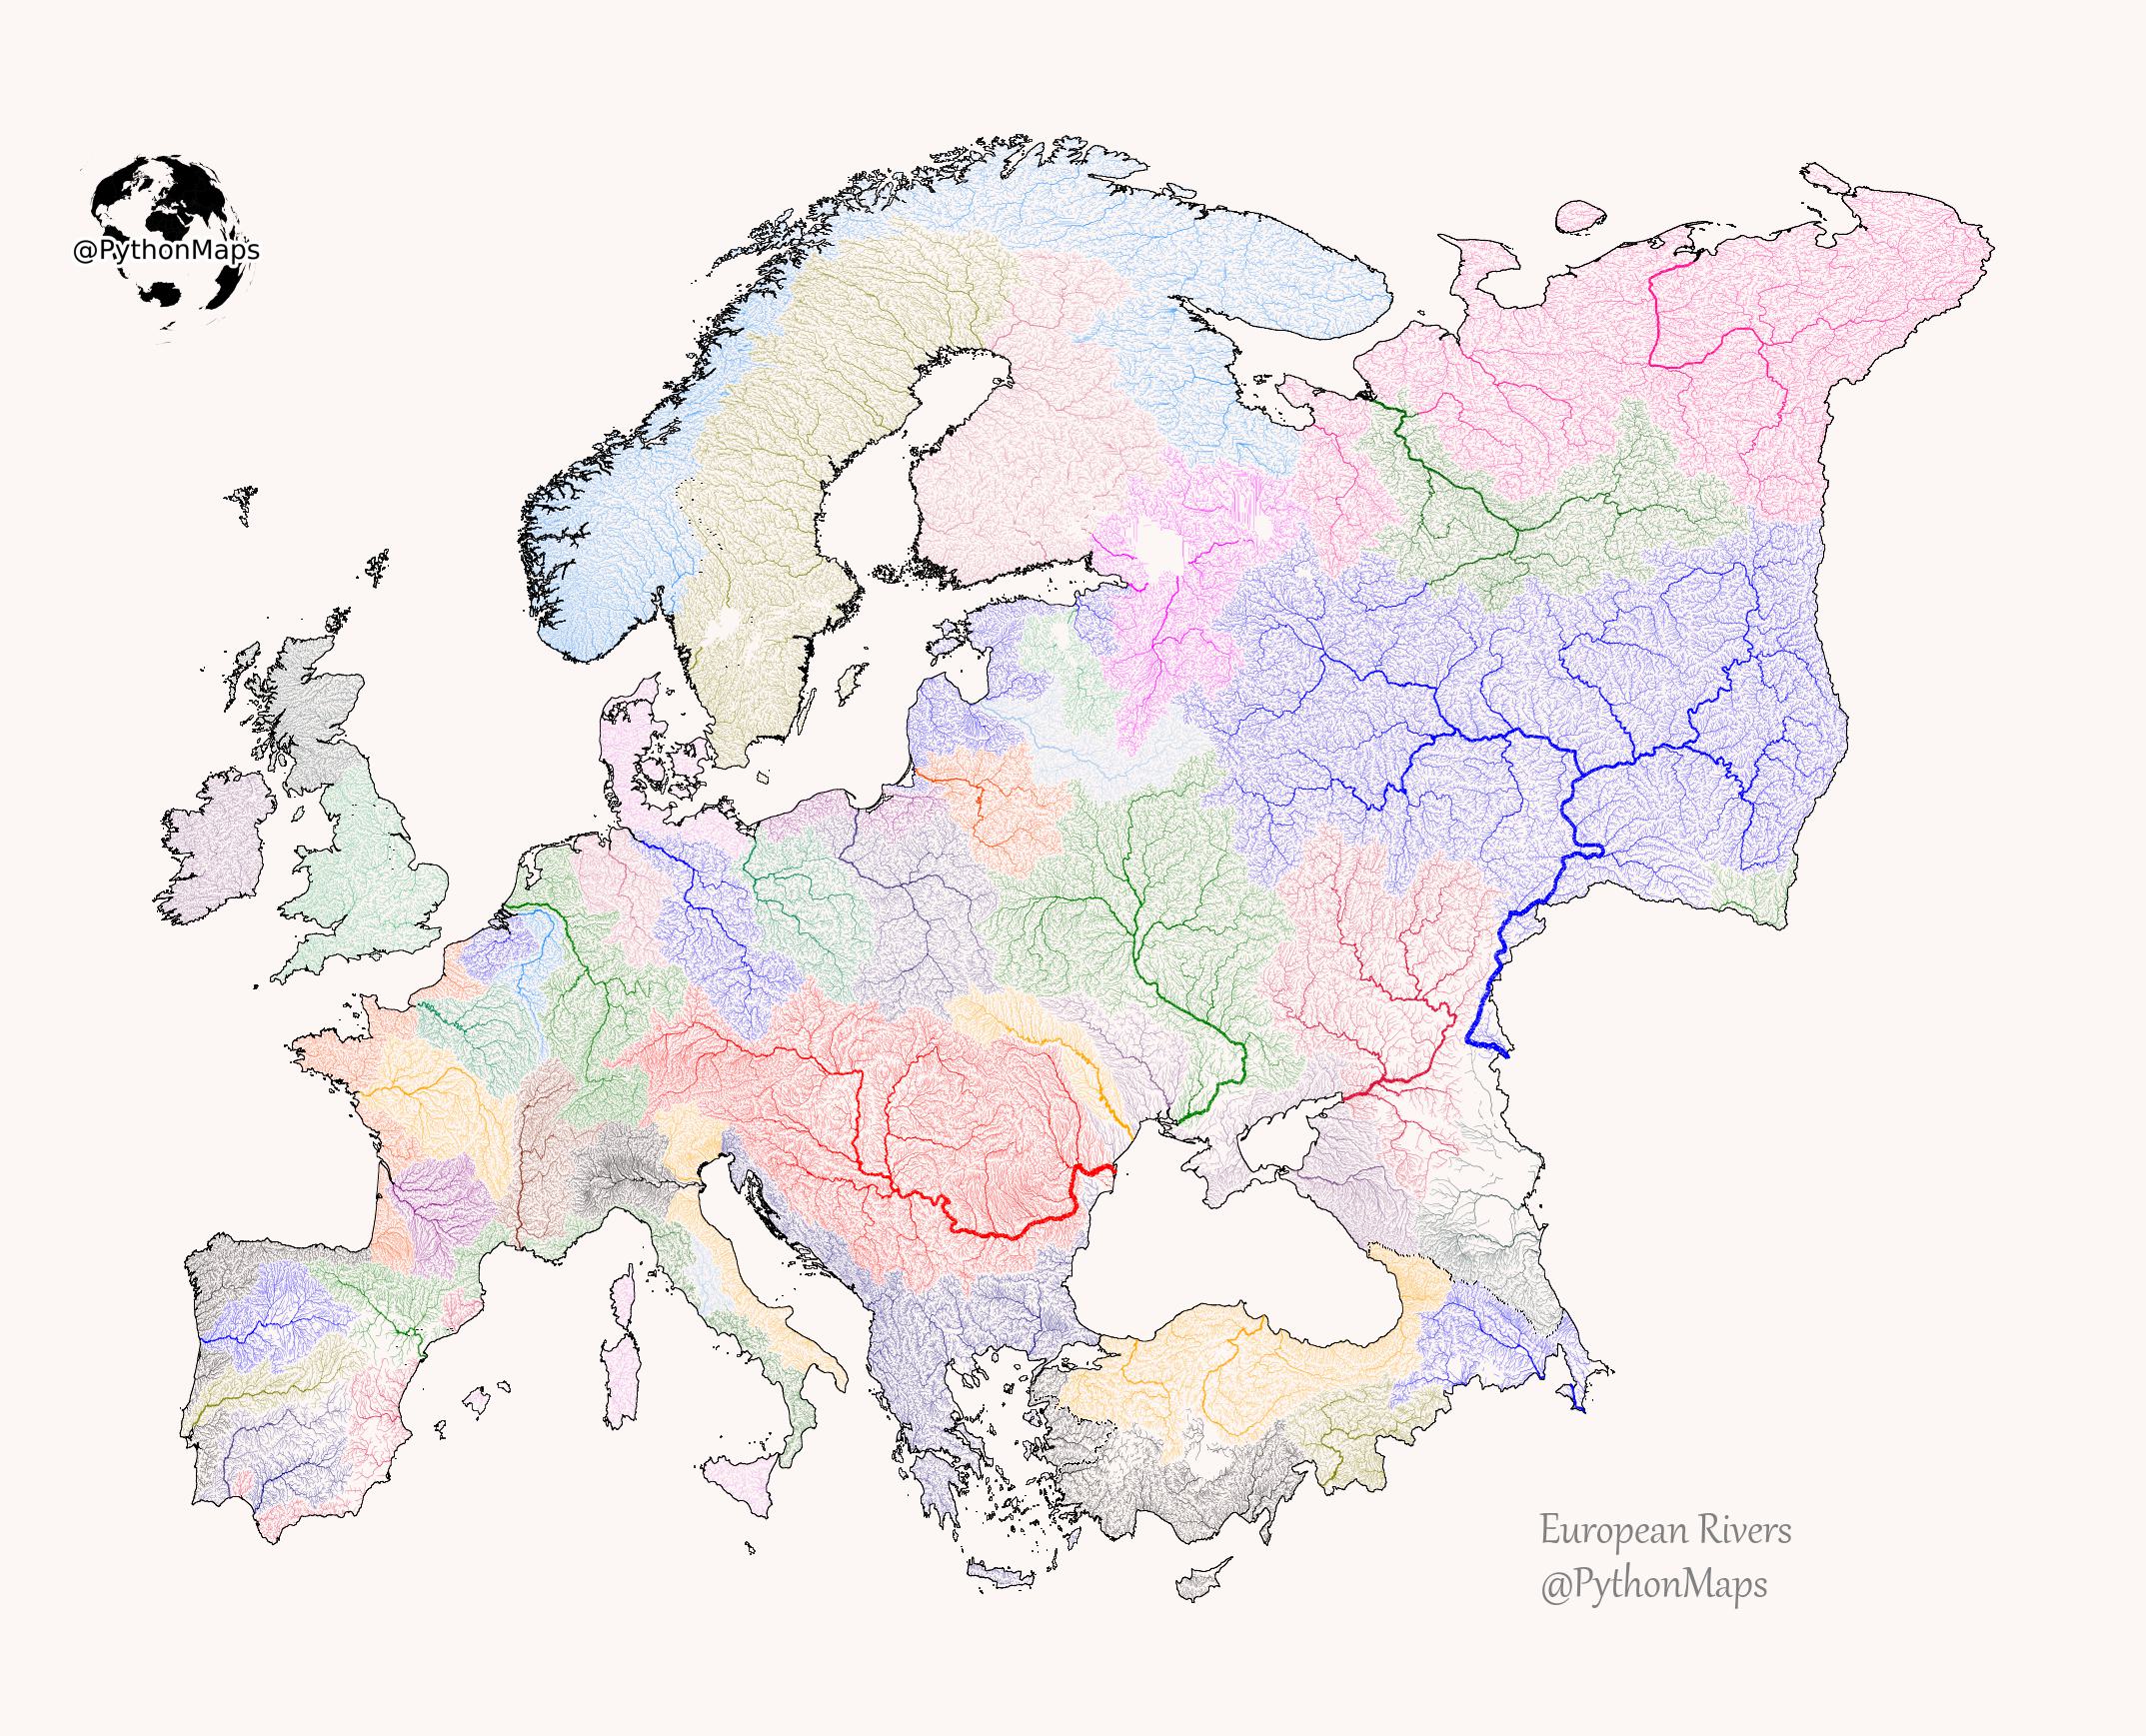 The Rivers of Europe